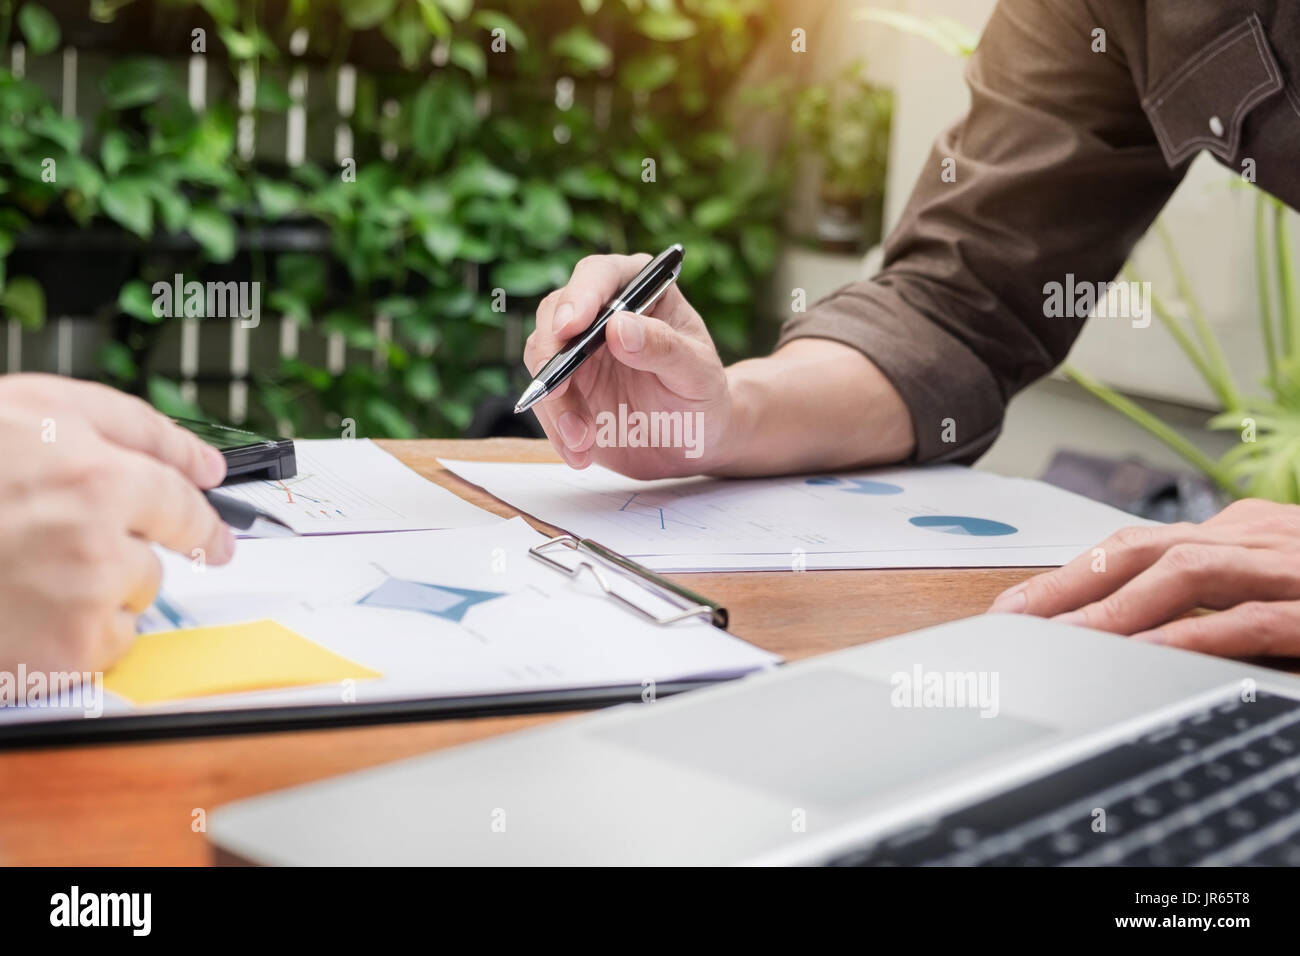 Business meeting  in outdoor. documents account managers crew working with new startup project Idea presentation, analyse marketing plans. Stock Photo